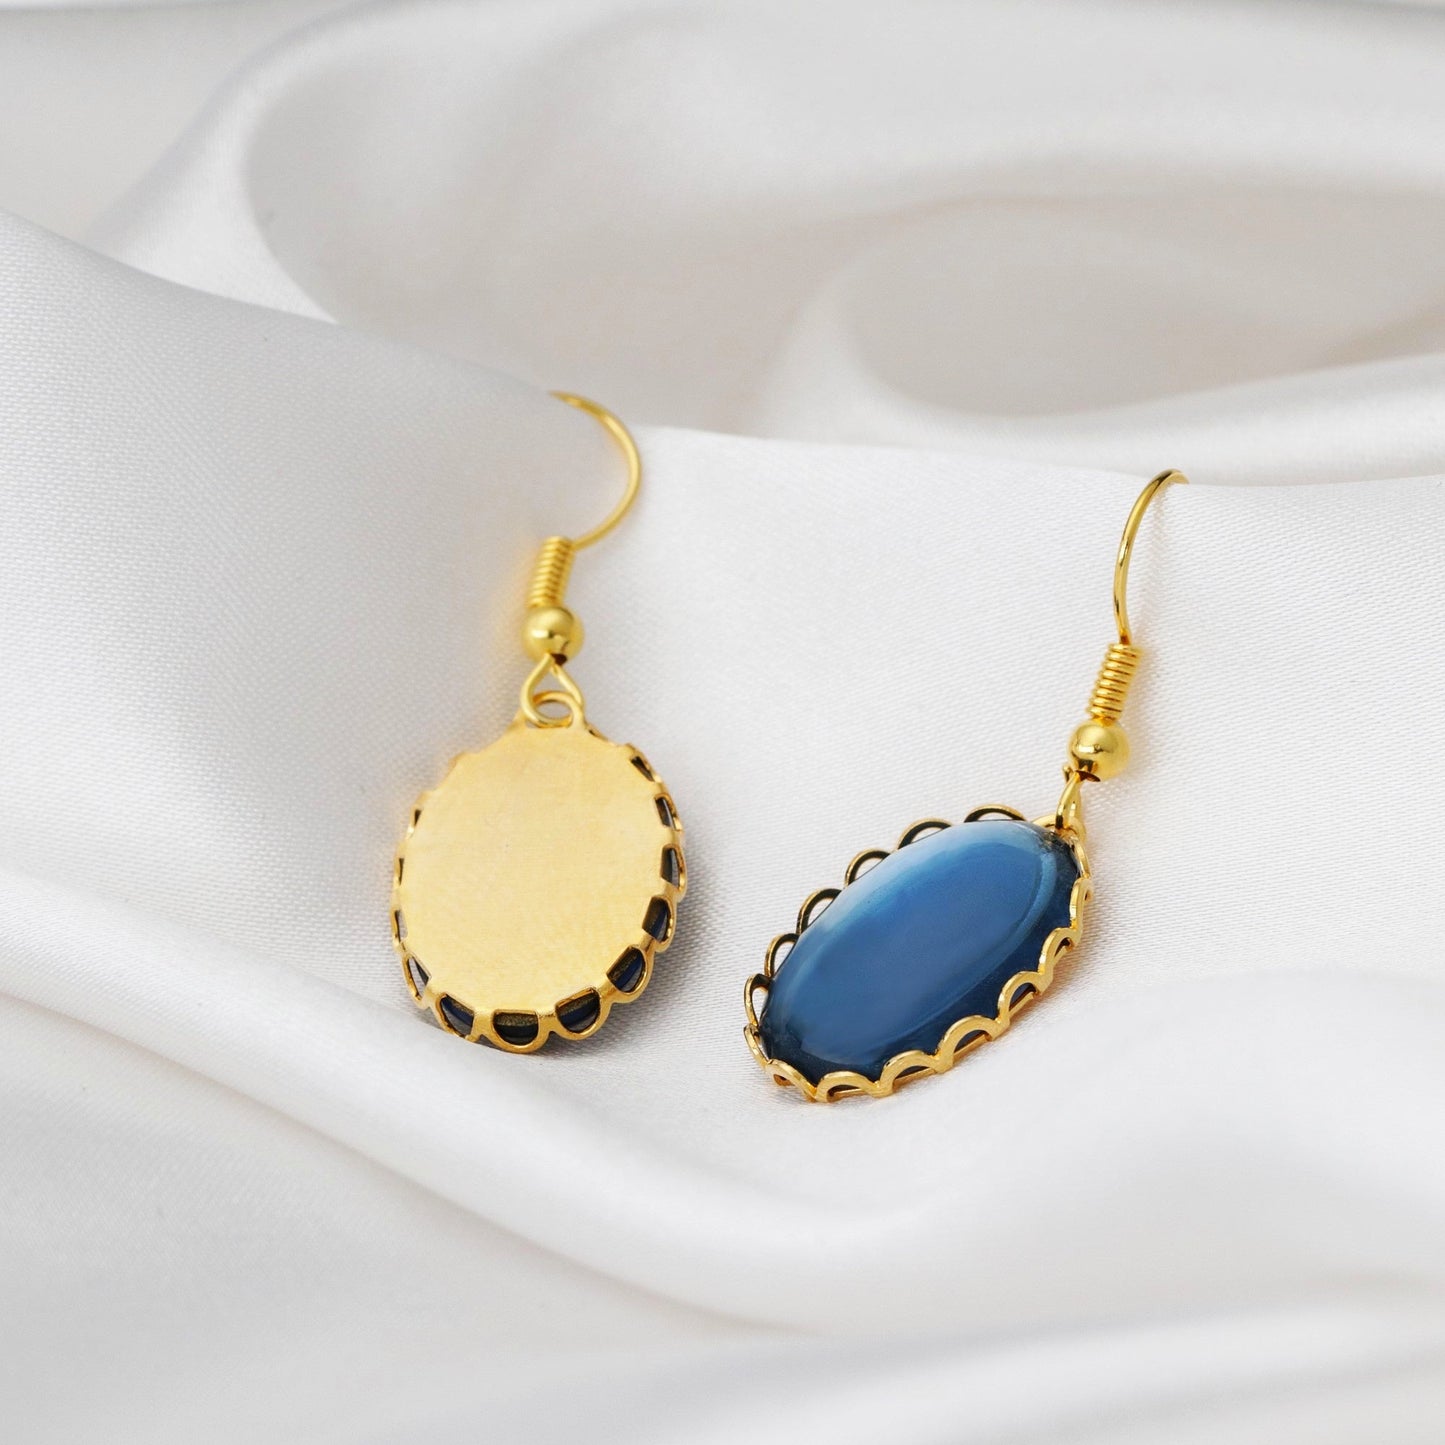 Blue shimmering earrings - gold-plated jewelry in vintage style - vinohr-65